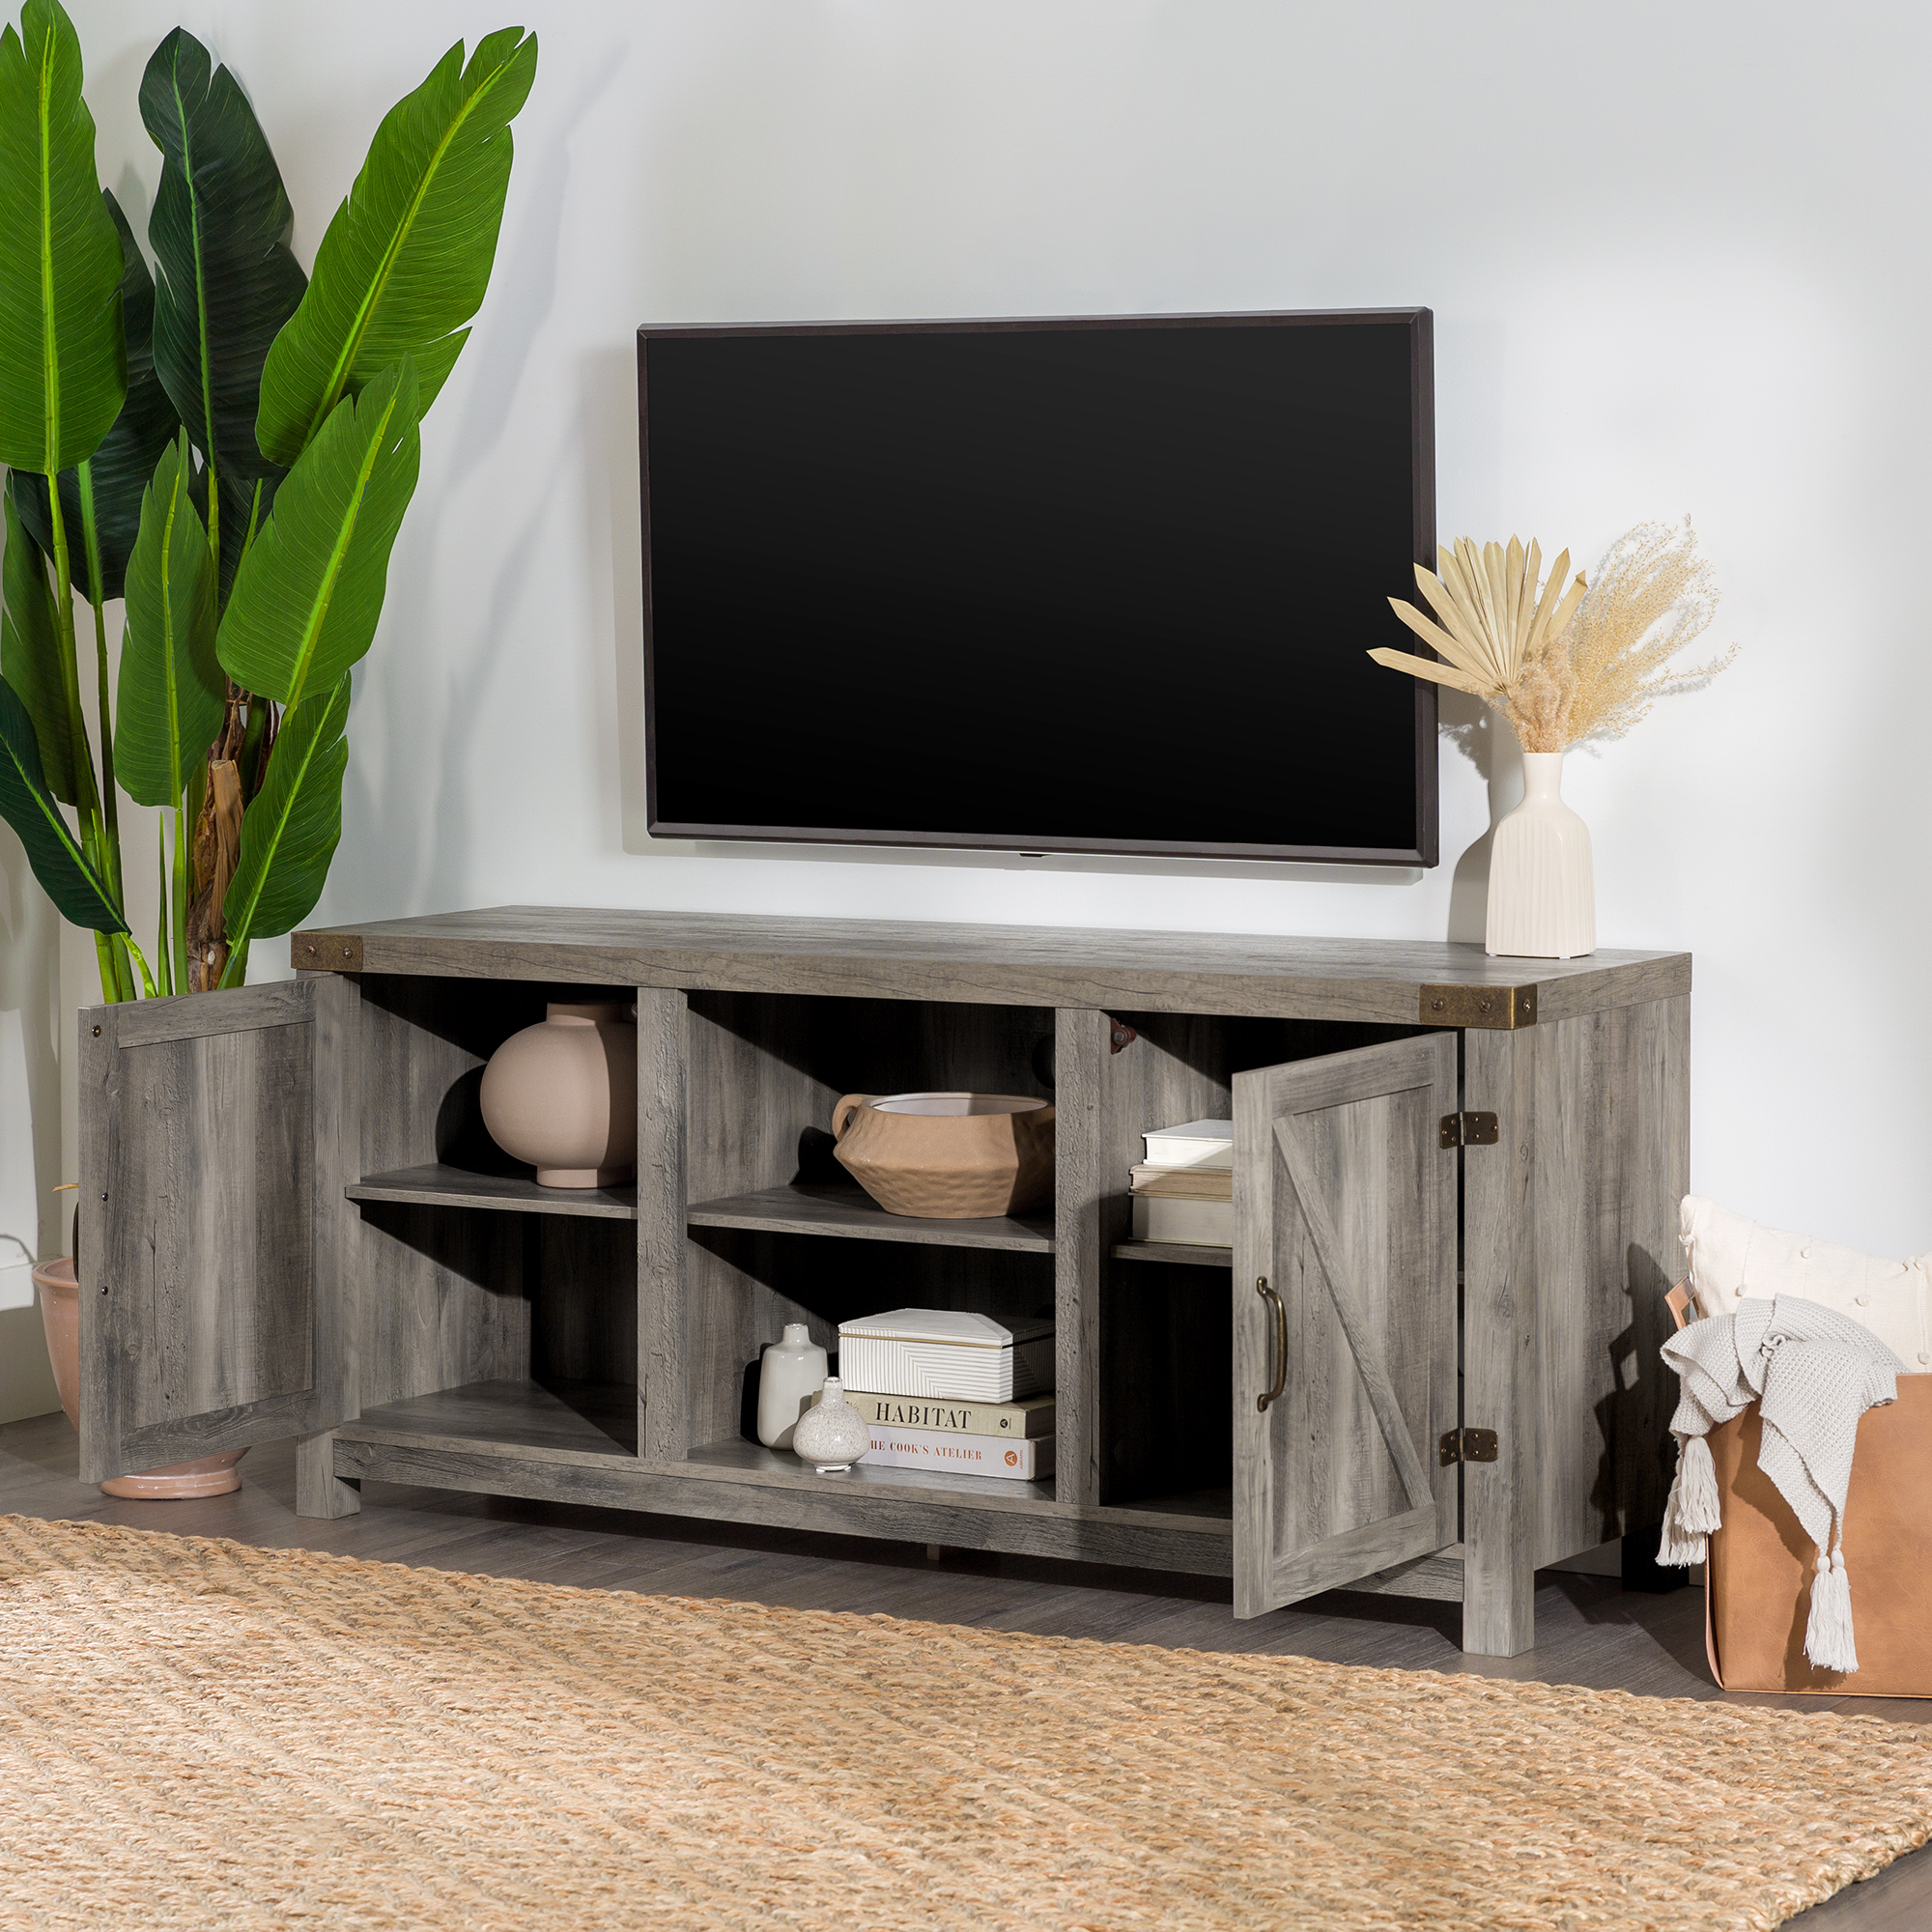 Walker Edison Modern Farmhouse Barn Door TV Stand for TVs up to 65", Grey Wash - image 4 of 22